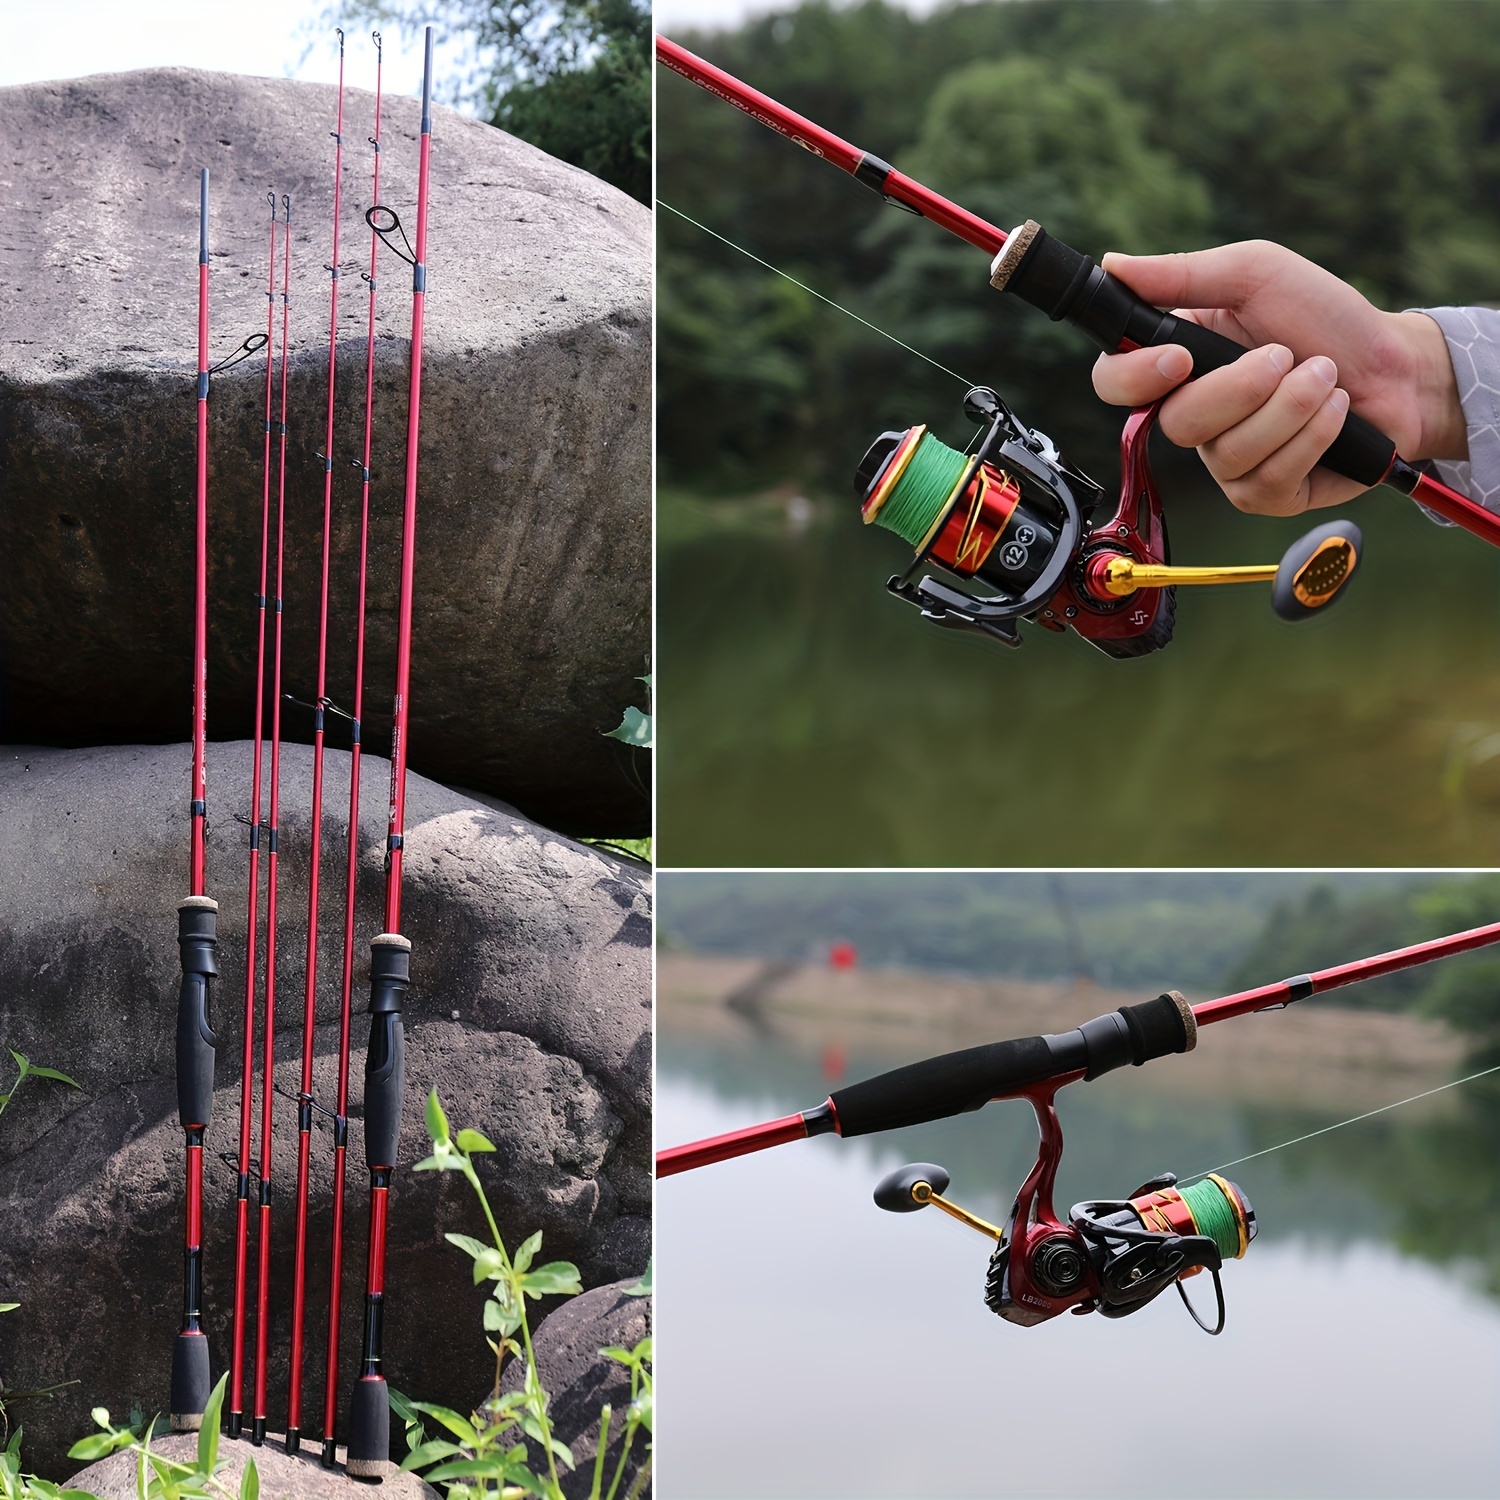 Sougayilang Fishing Rod Combos with Telescopic Fishing Pole Spinning Reels  Fishing Carrier Bag for Travel Saltwater Freshwater F